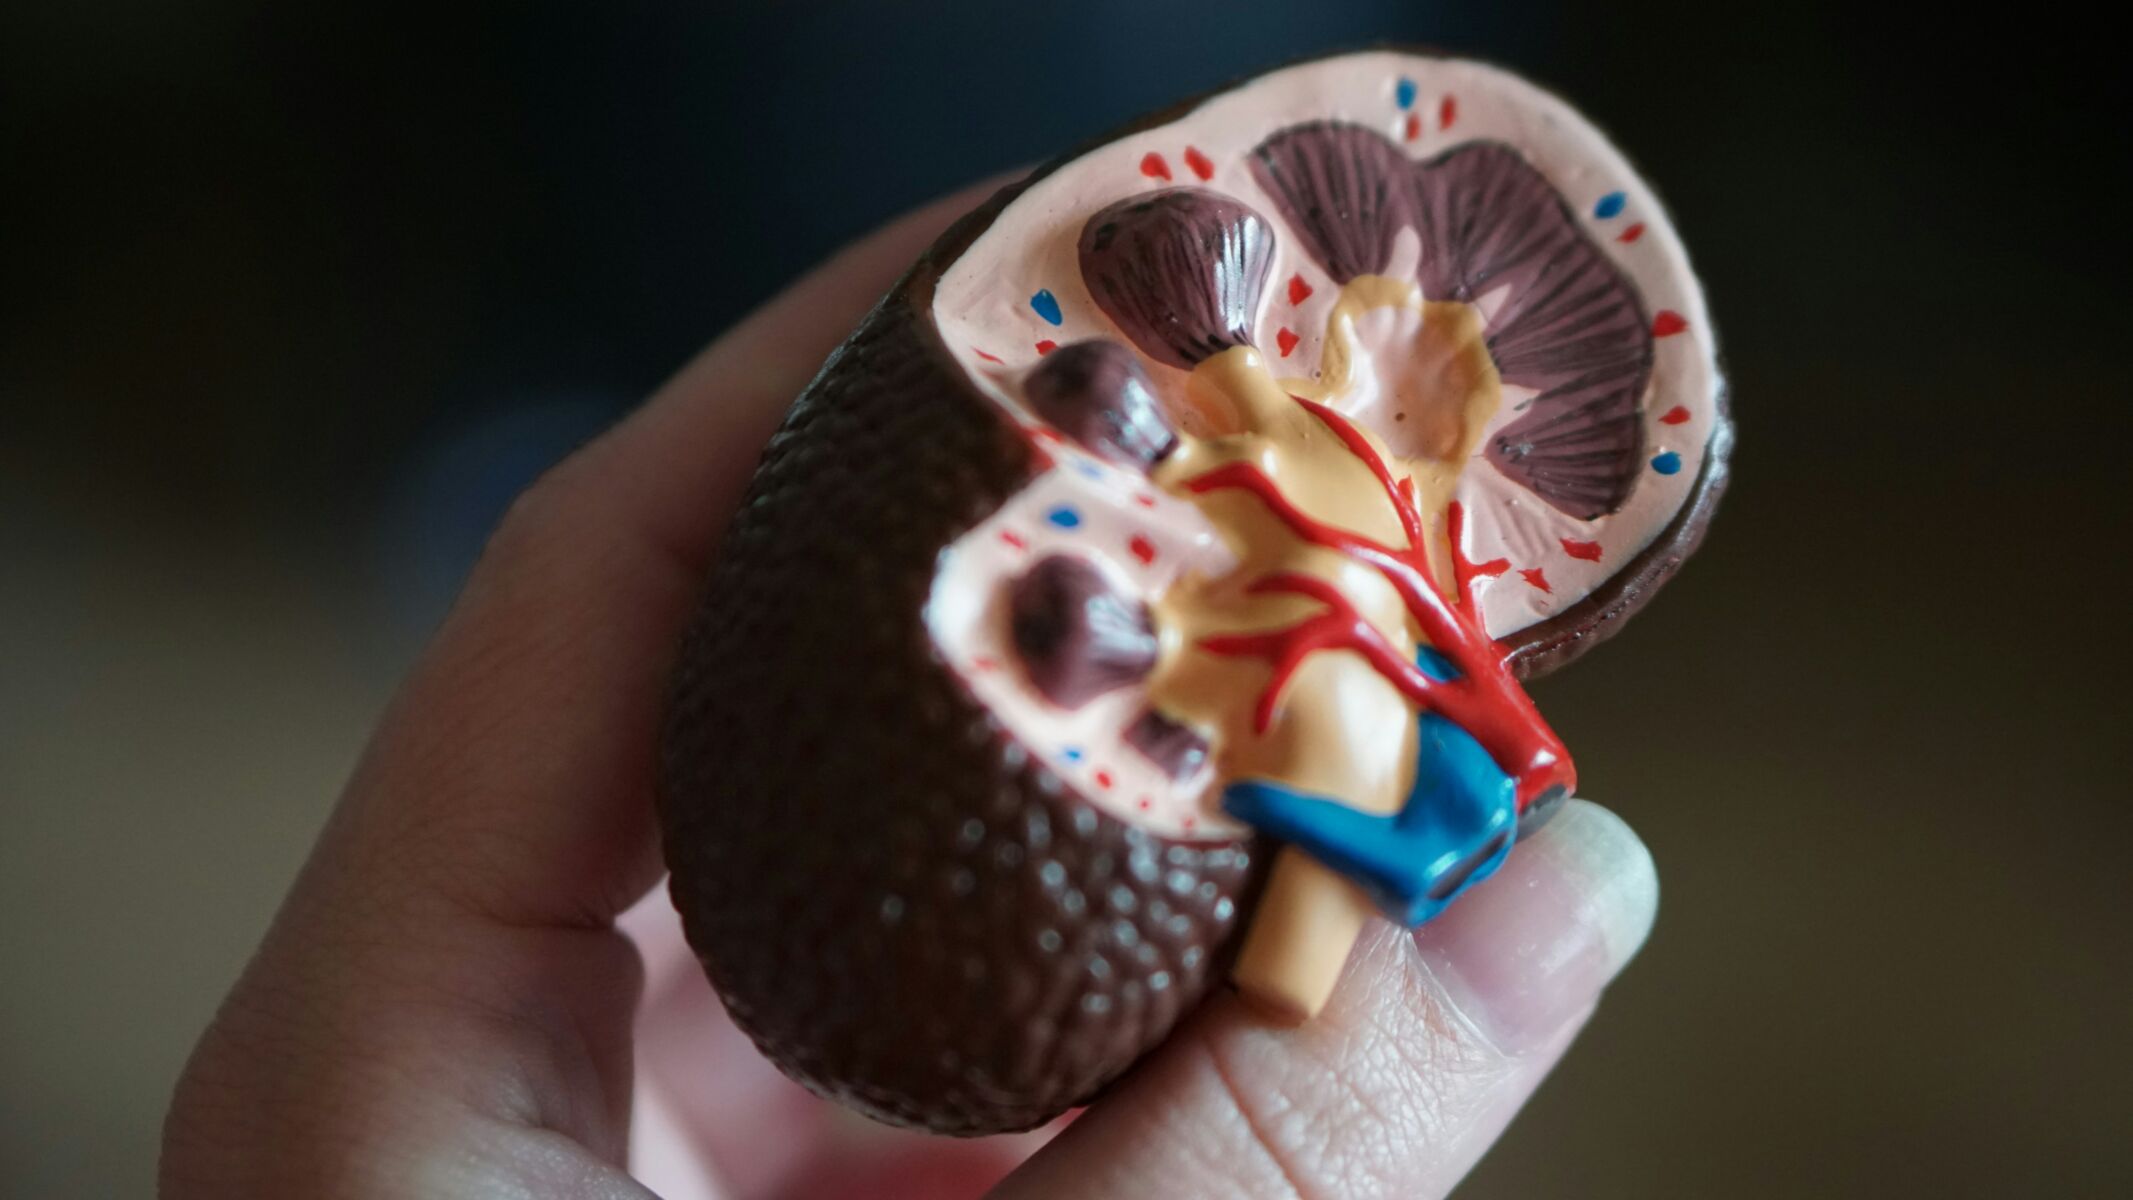 The hidden epidemic: Almost 90% of individuals do not even know they have kidney issues until it is too late | News by Thaiger